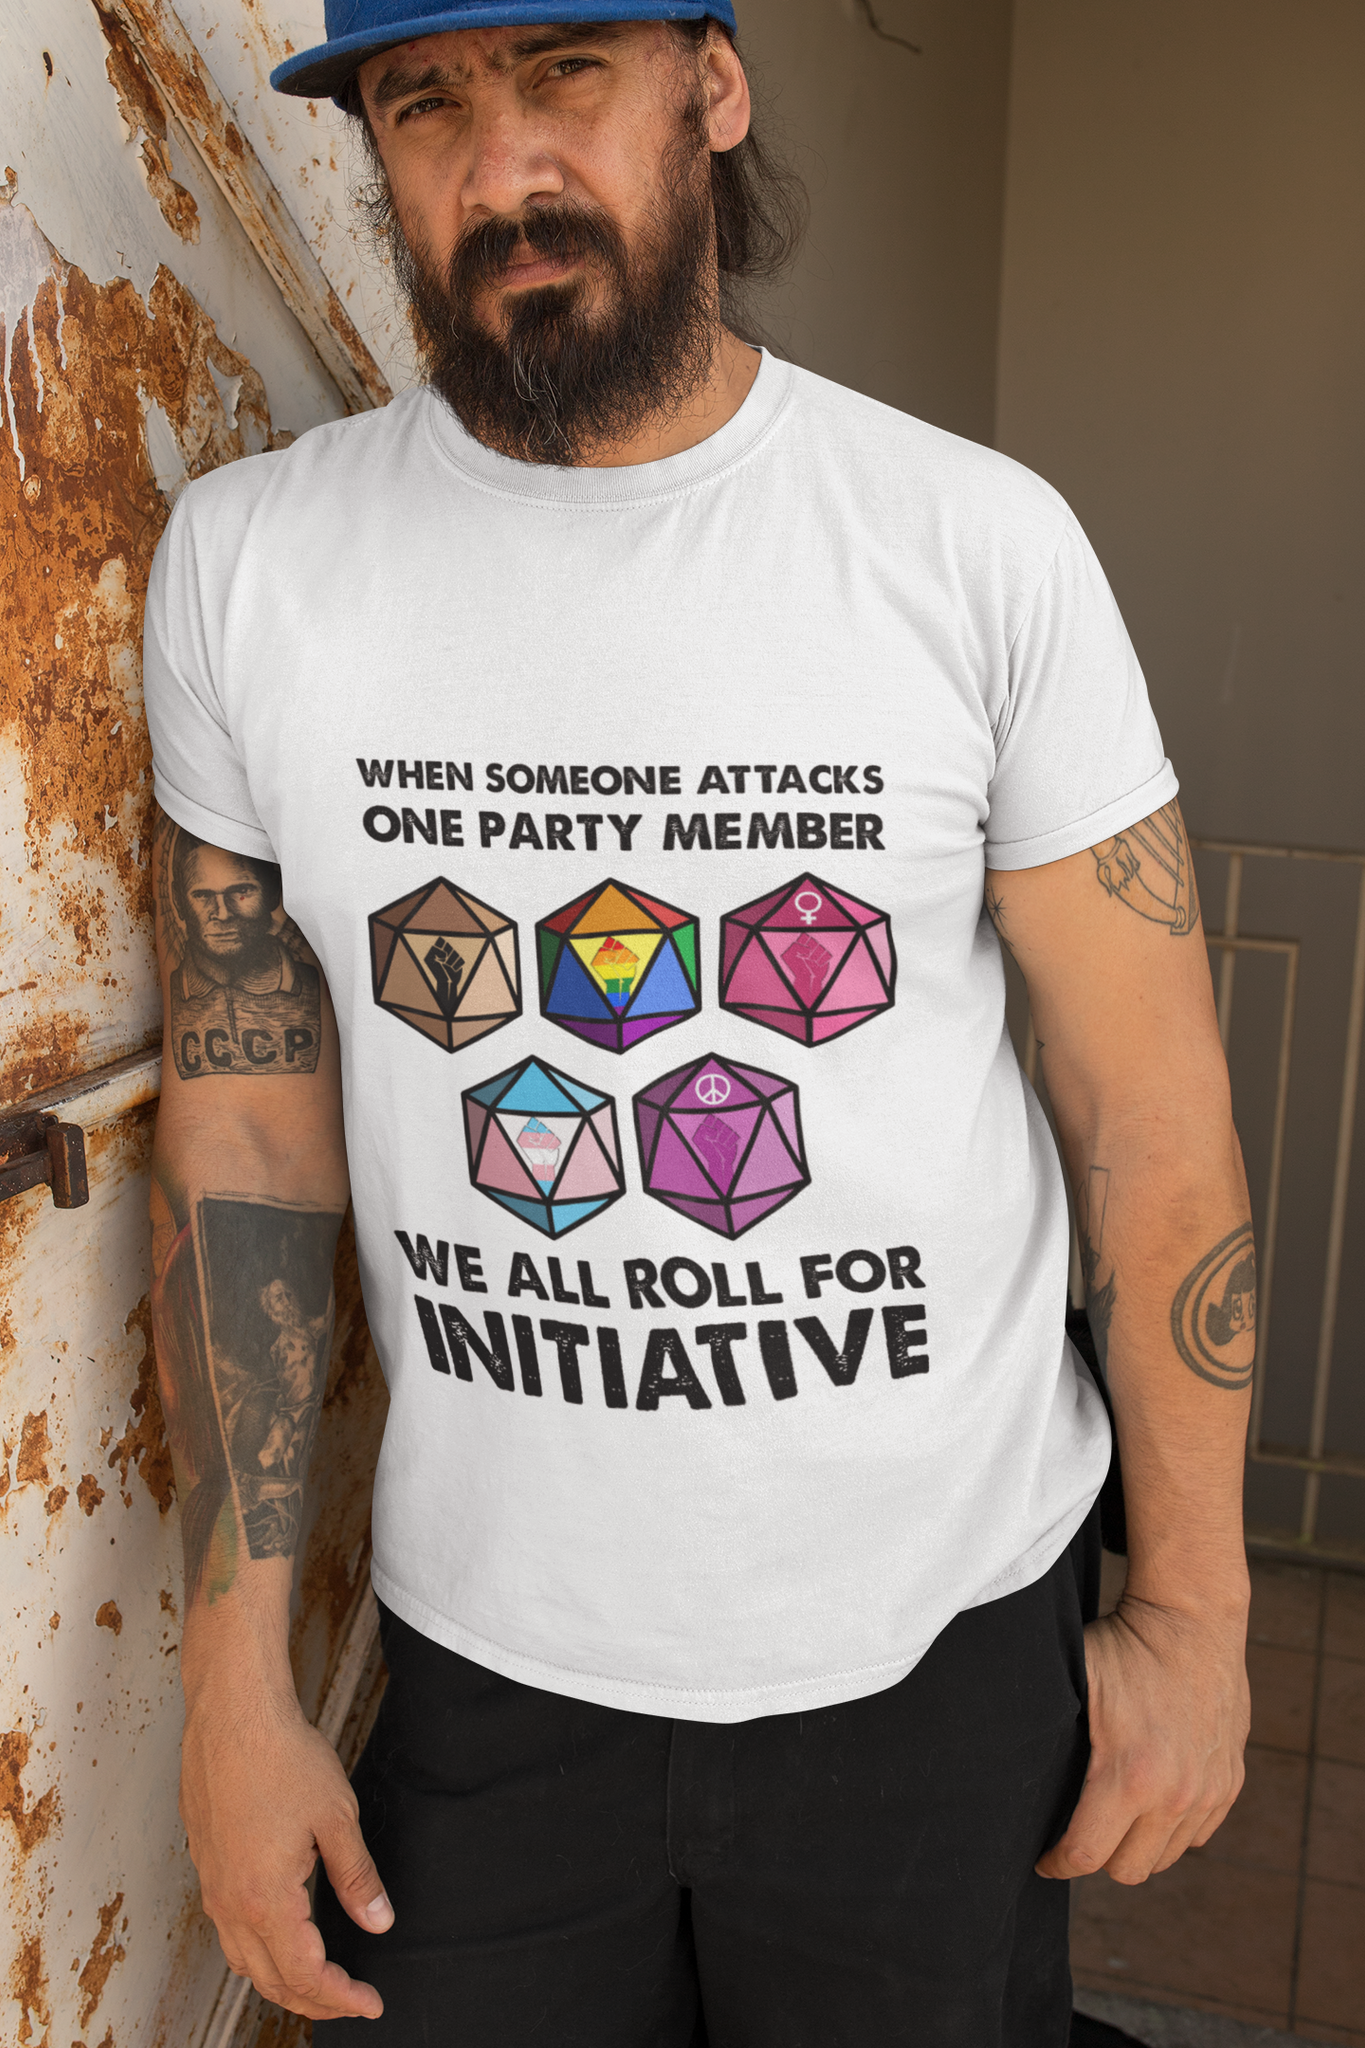 Dungeon And Dragon T Shirt, RPG Dice Games Tshirt, We All Roll For Initiative DND T Shirt